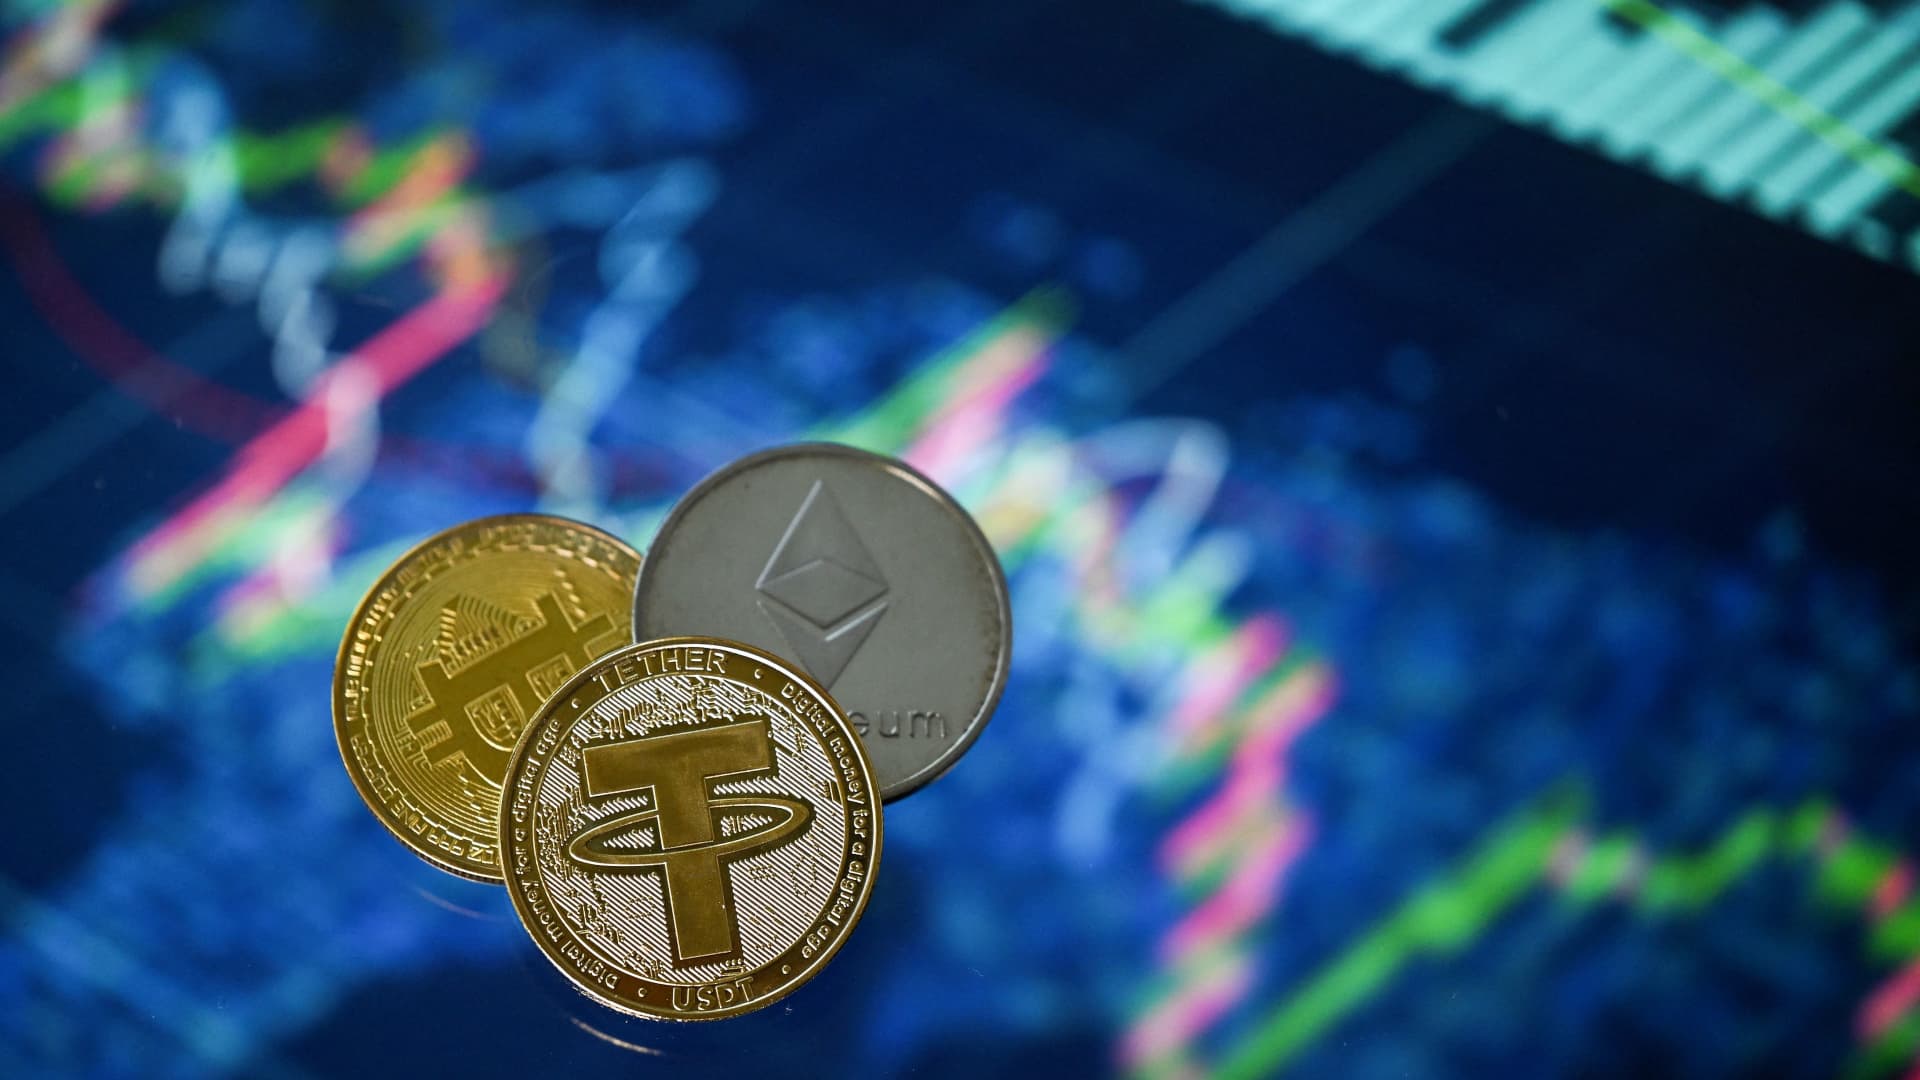 Crypto firm Tether says it has around $1.6 billion in excess reserves to back its USDT stablecoin